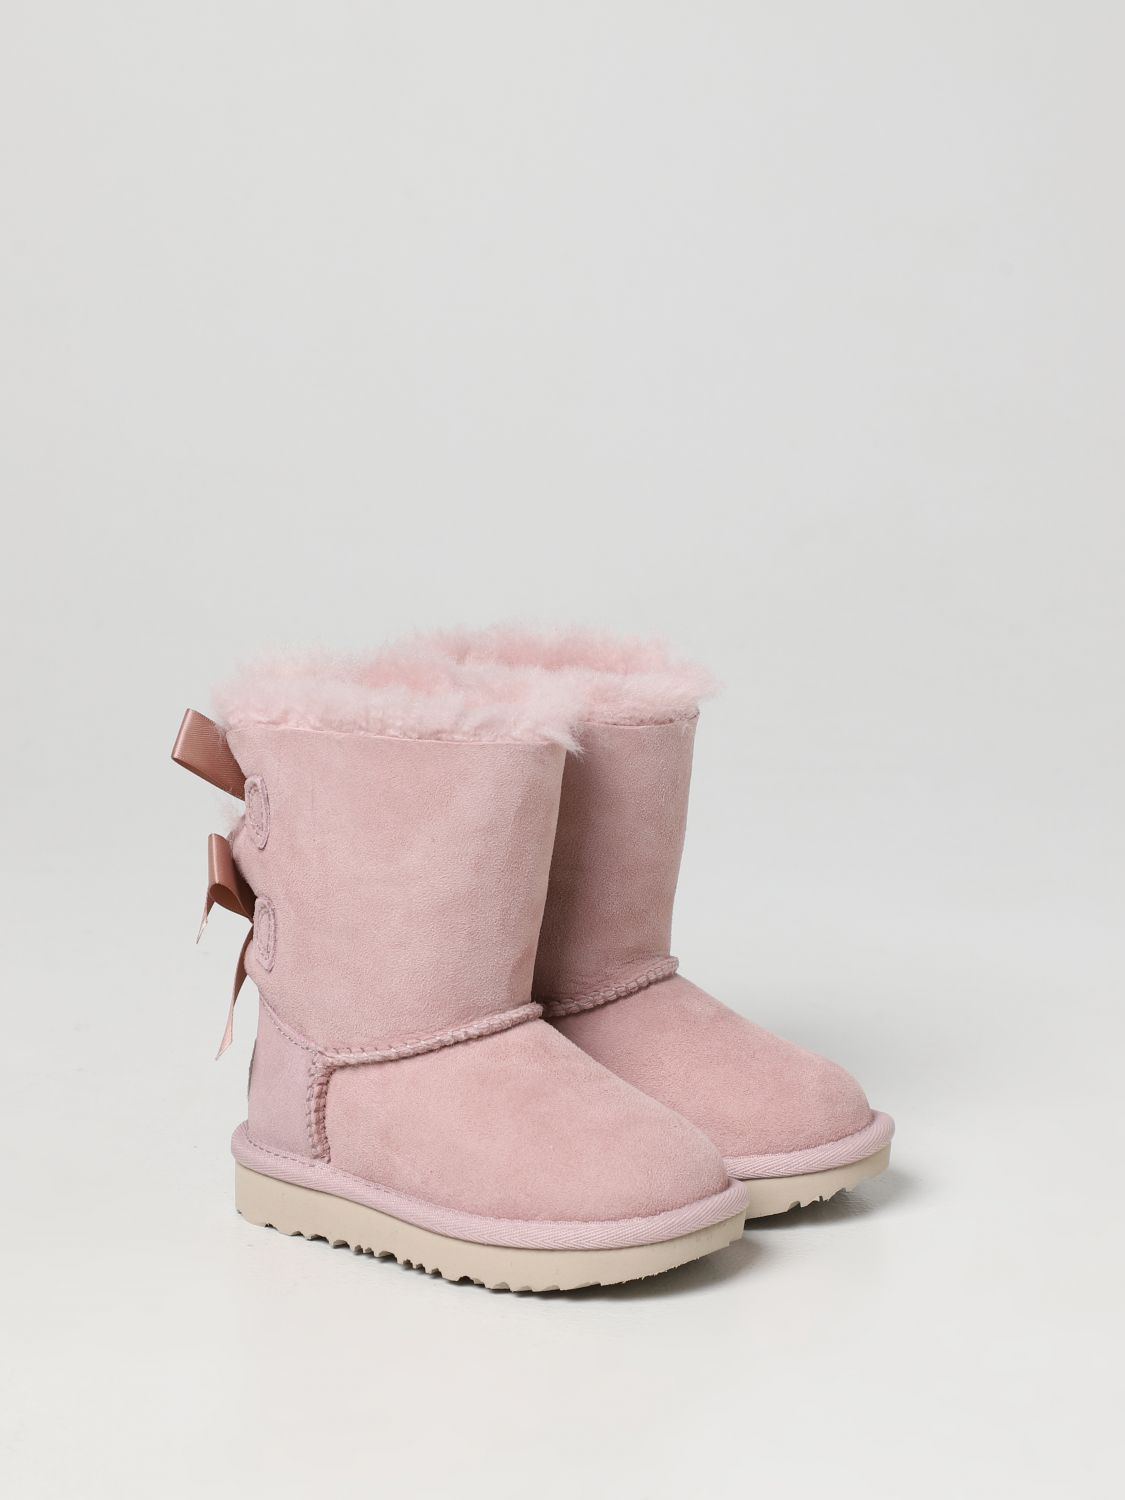 Scarpe Ugg: Stivaletto Bailey Bow II Ugg in suede rosa 2